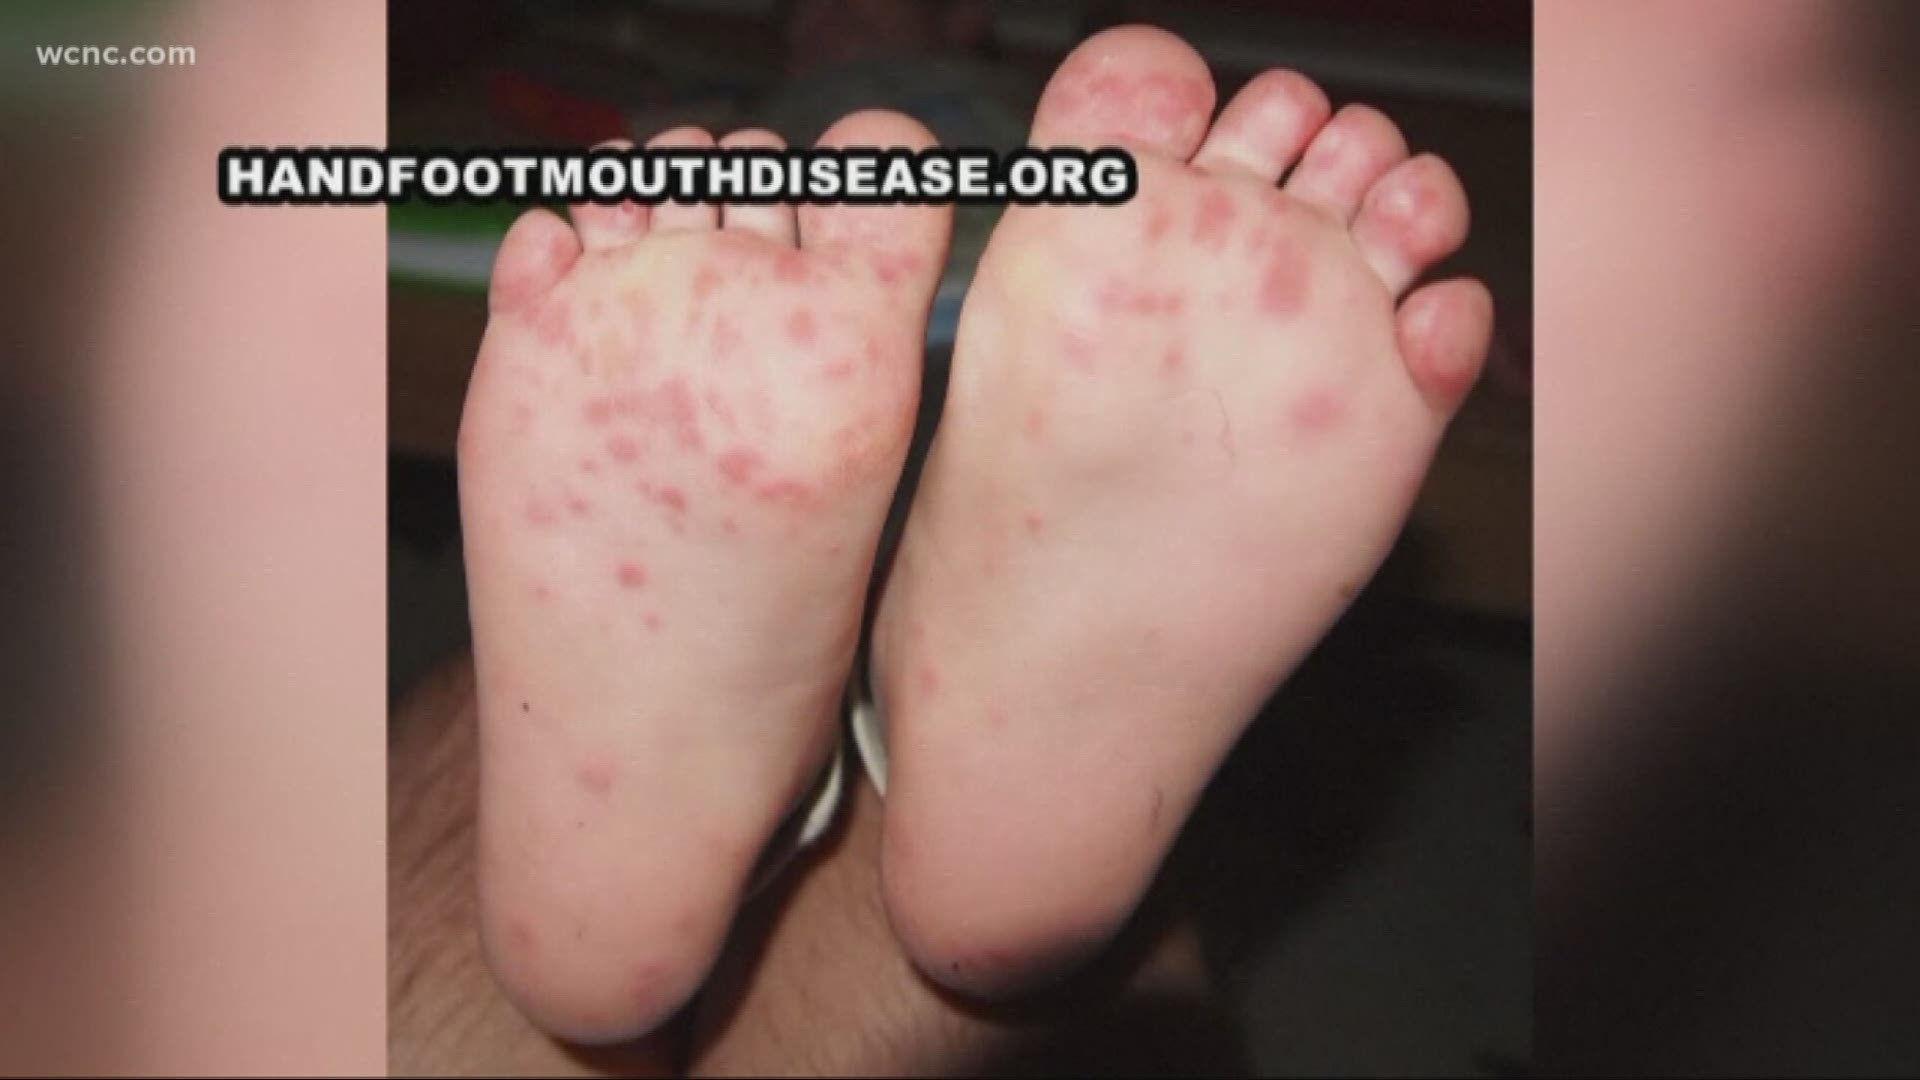 Doctors in South Carolina are seeing cases of hand, foot and mouth disease.